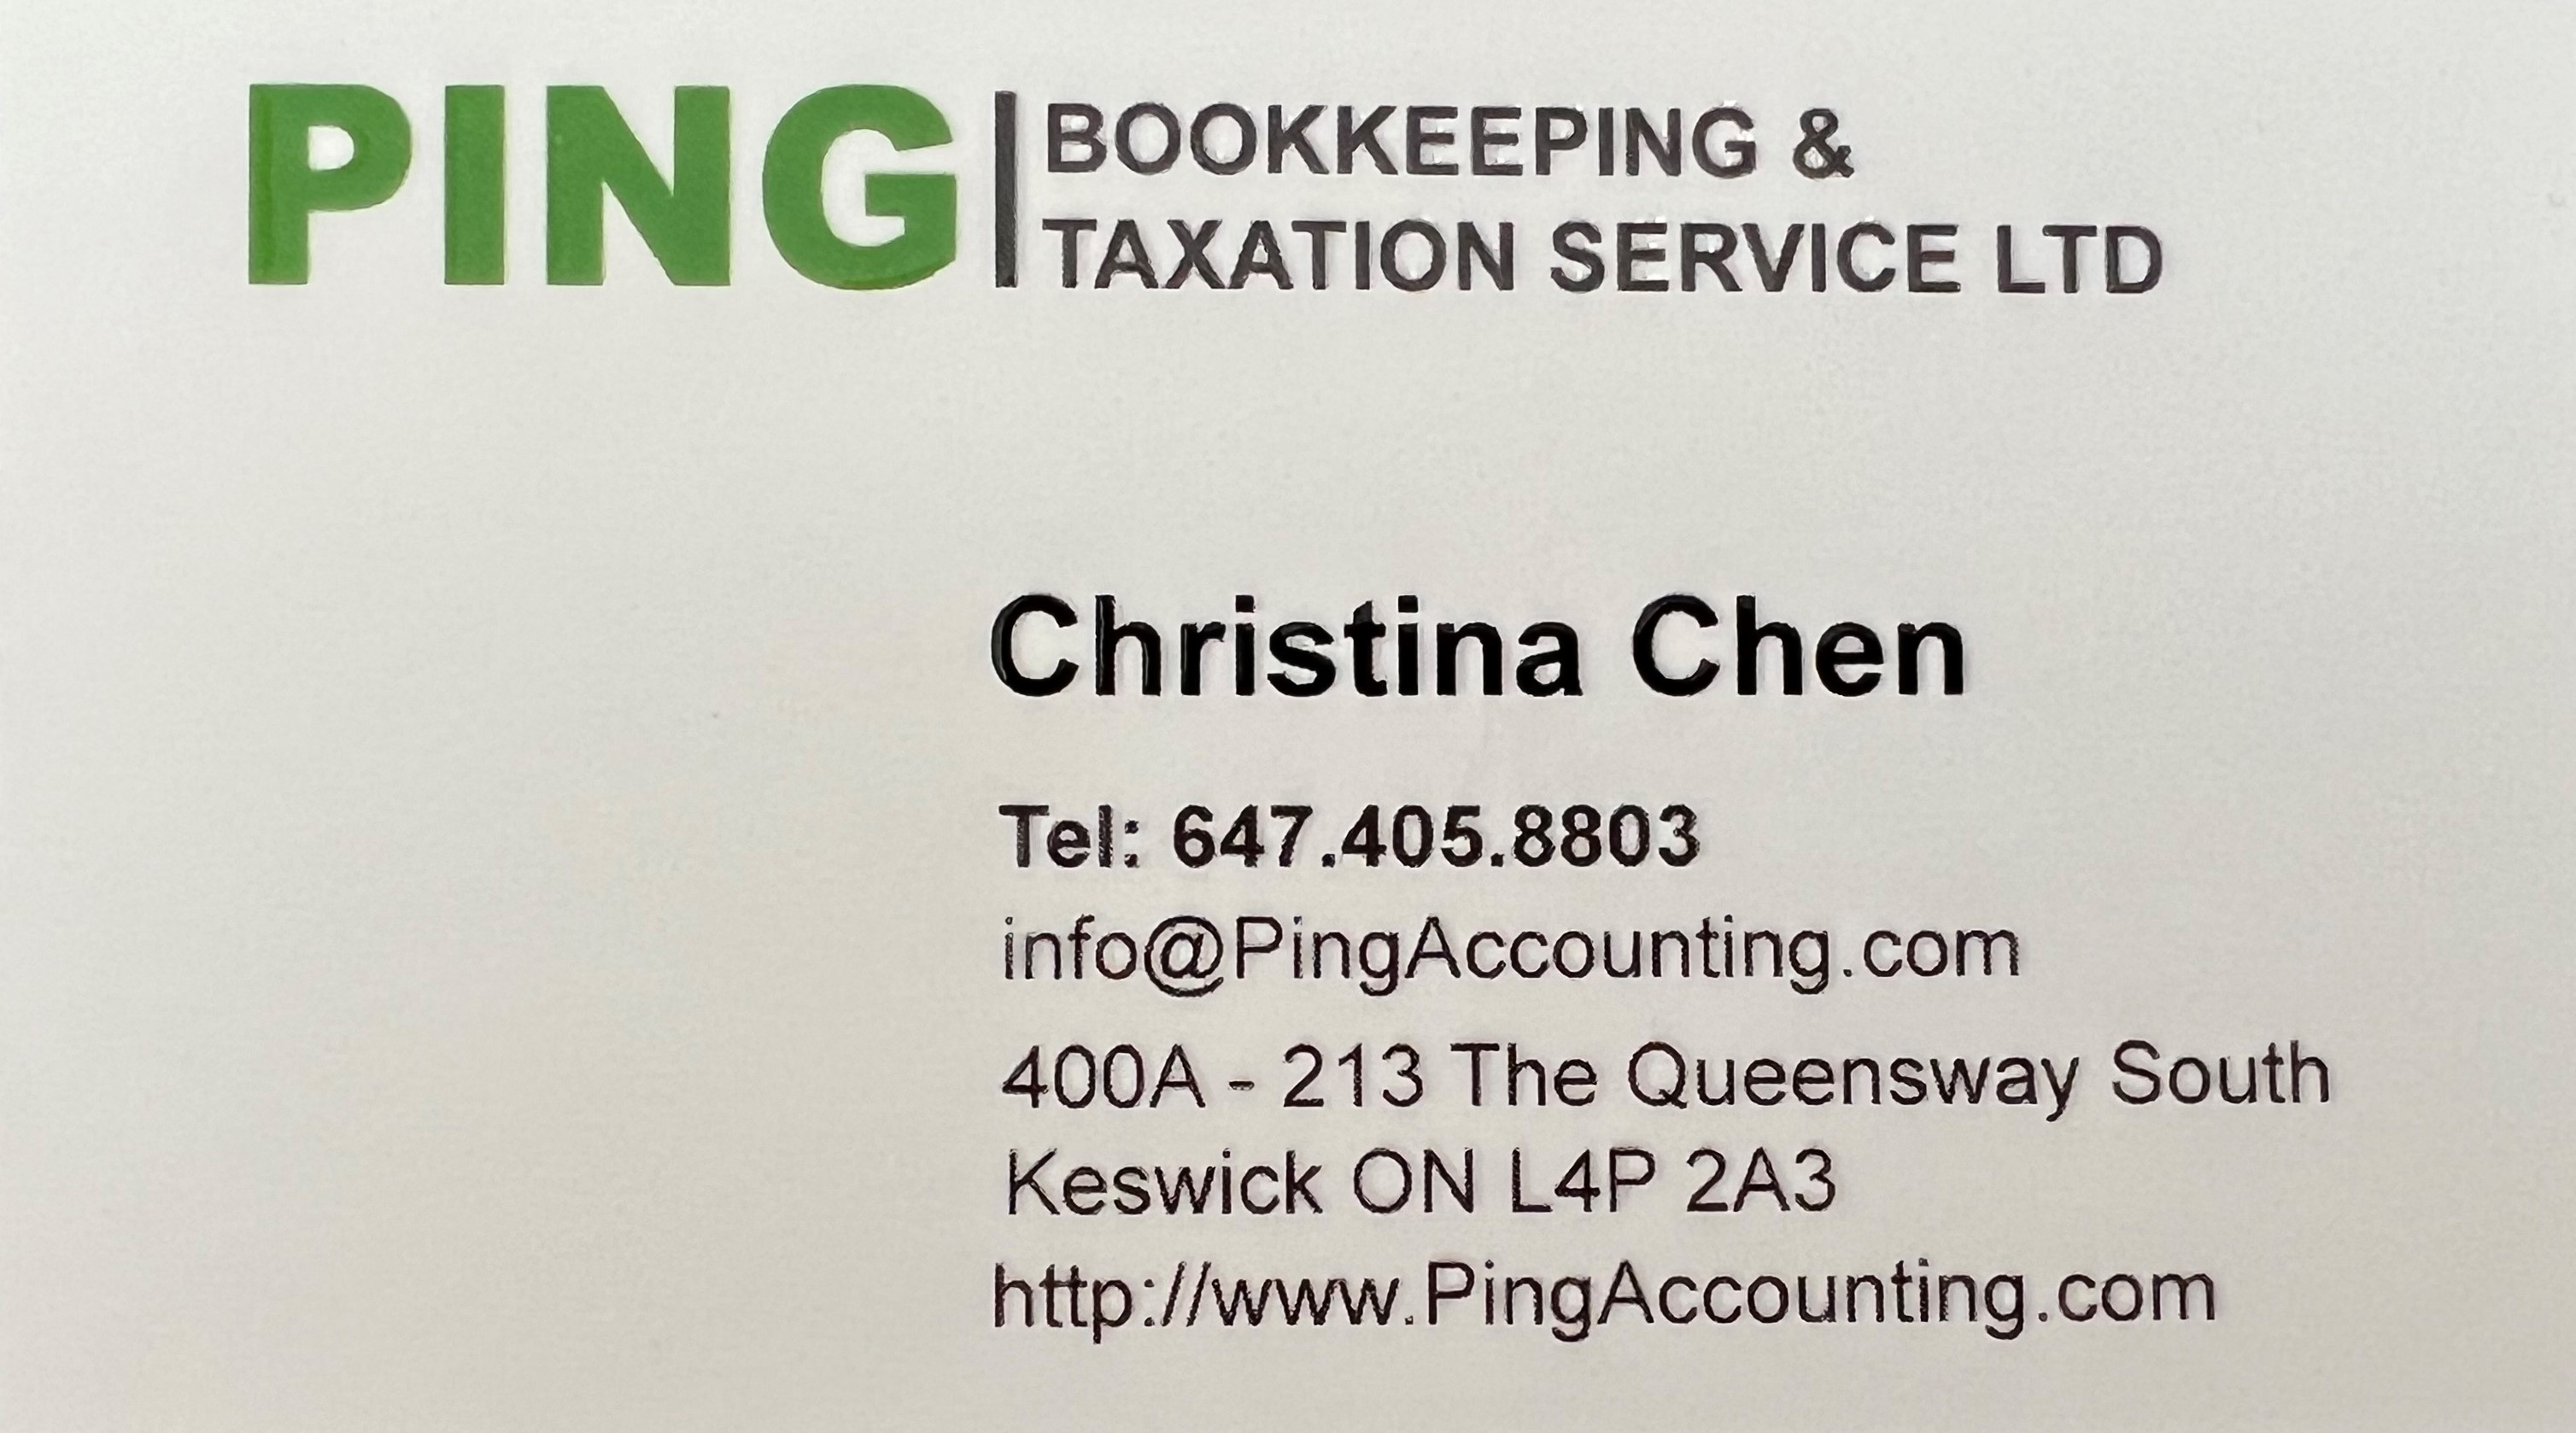 Logo-Ping Bookeeping and Taxation Services